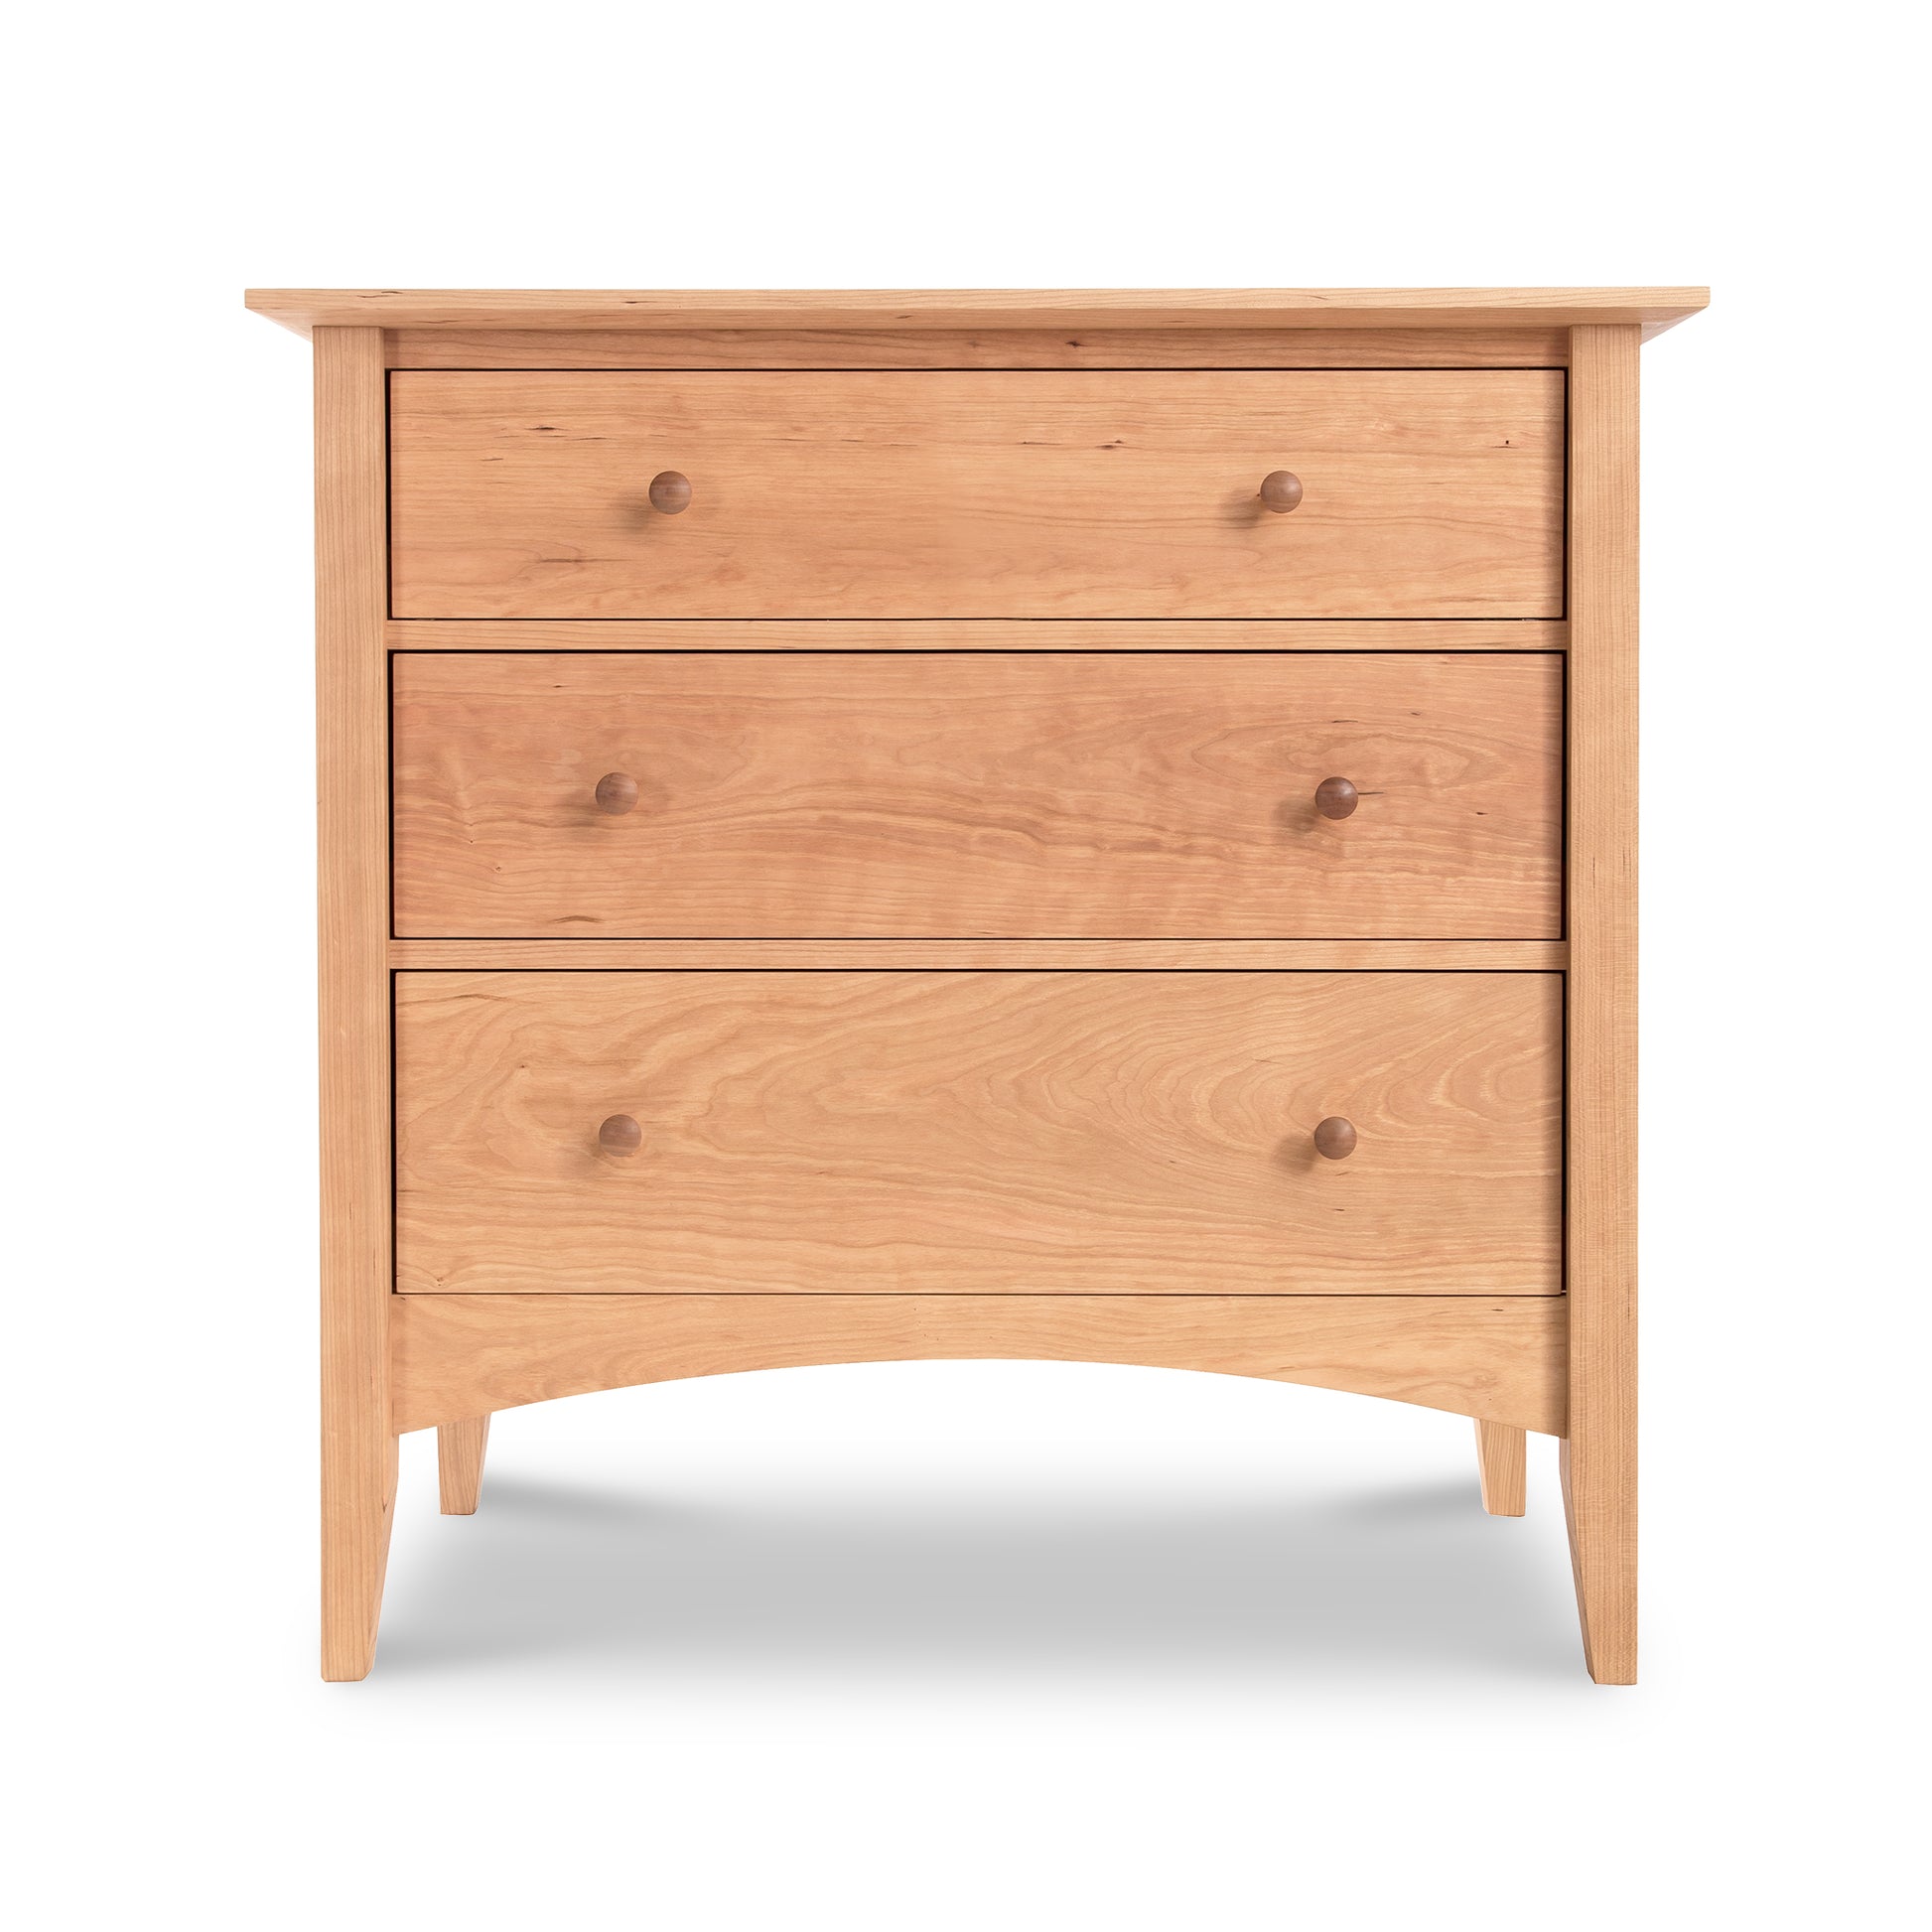 A sustainably harvested Maple Corner Woodworks American Shaker 3-Drawer Chest with round knobs and curved legs, isolated on a white background.